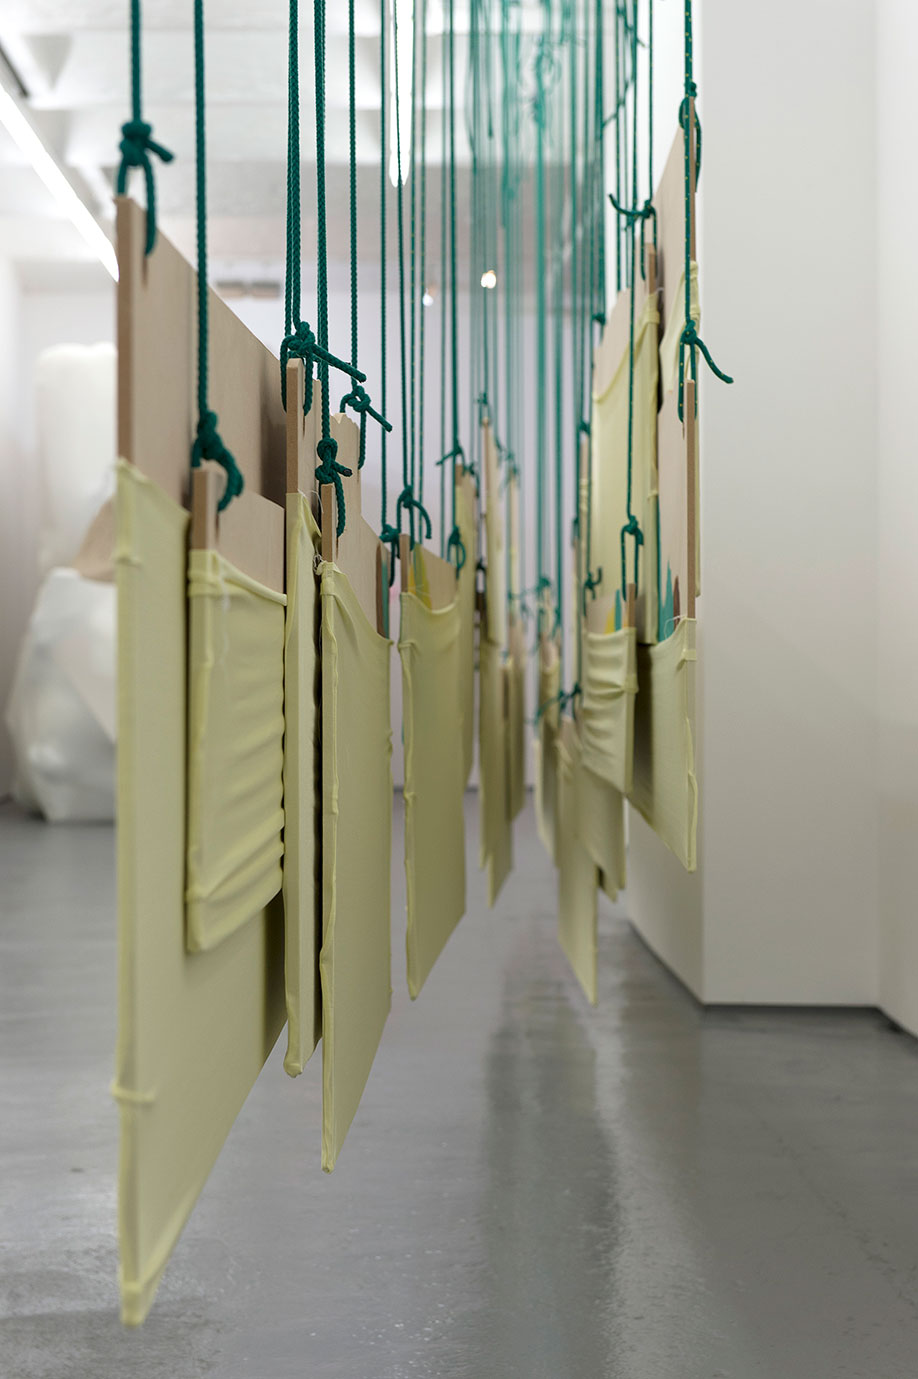 <b>Title: </b>Reconfiguring Landscape (Double Hanging Piece)<br /><b>Year: </b>2015<br /><b>Medium: </b>MDF, lycra, rope, and stainless steel<br /><b>Size: </b>Dimensions variable, 290 x 910 x 28 cm approx.